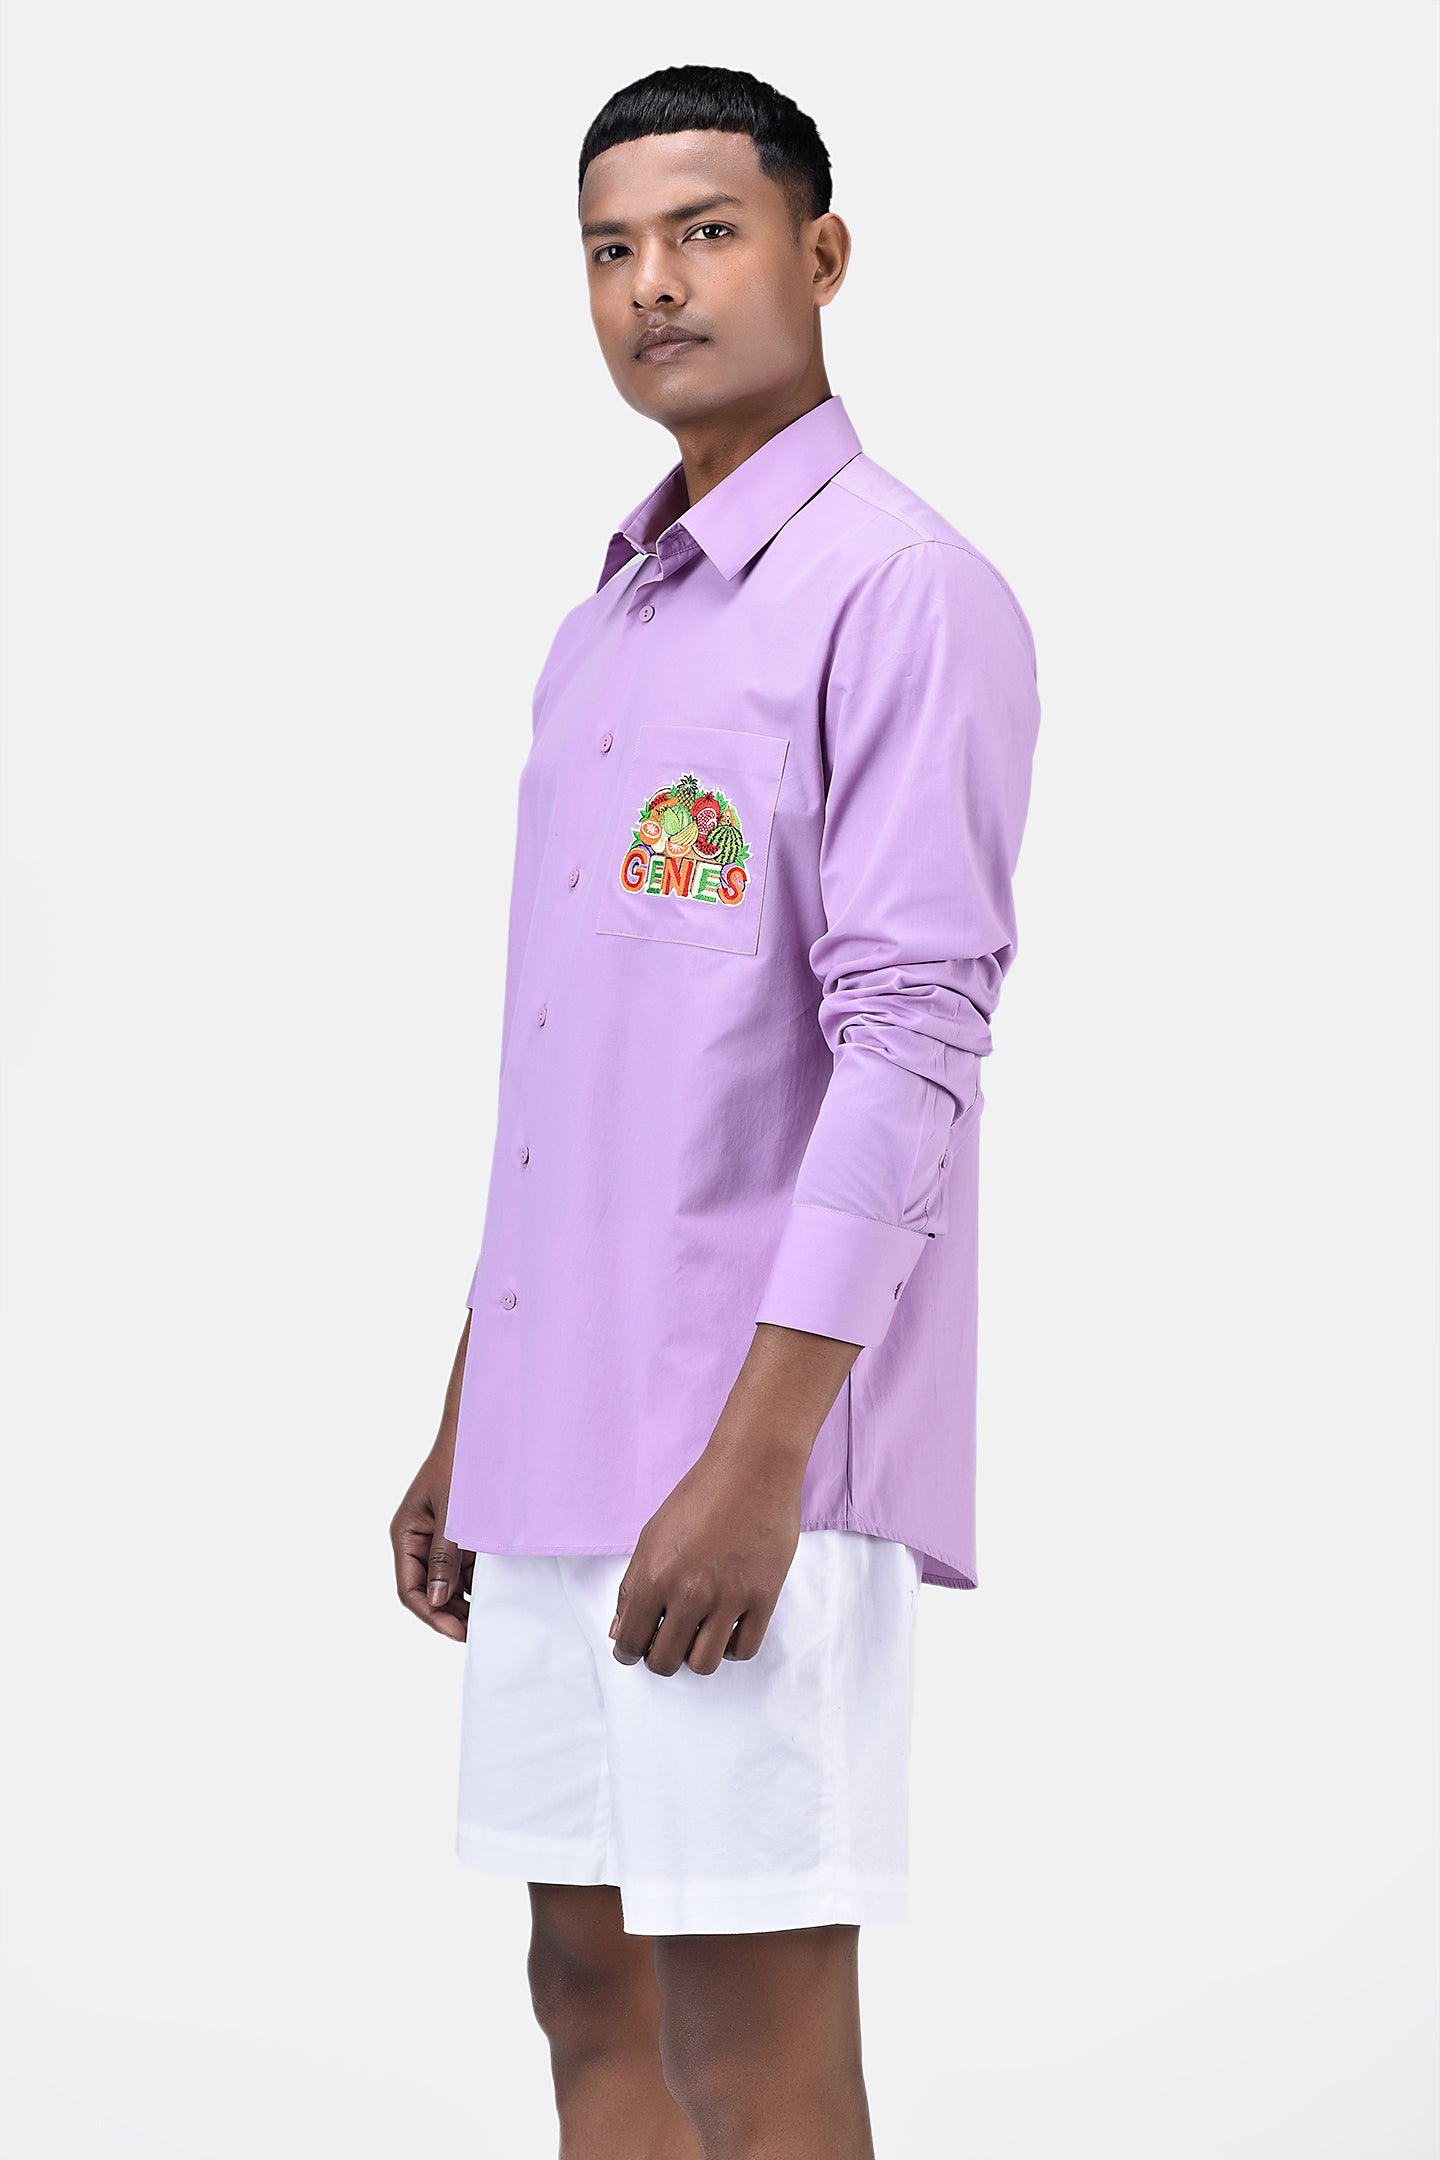 Men's Regular Fit Button Down Shirt with Fruit Basket Embroidery